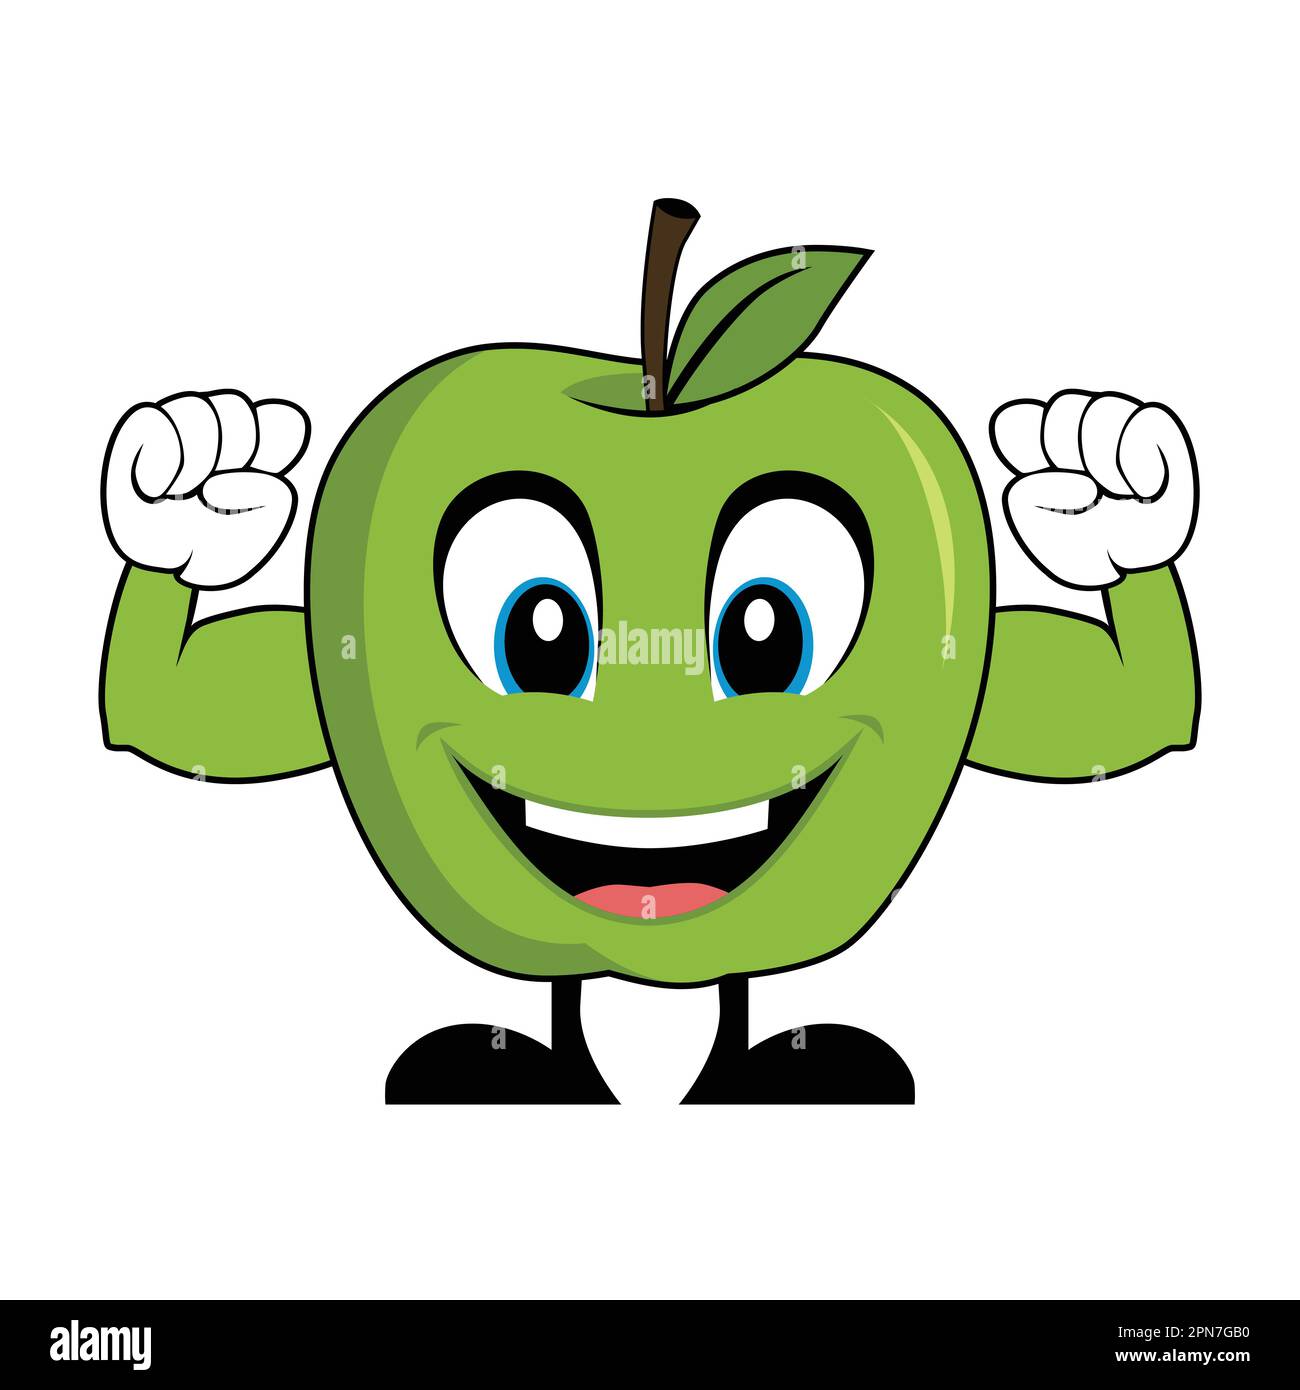 Green Apple Cartoon Character with Muscle Arms. Suitable for poster, banner, web, icon, mascot, background Stock Vector